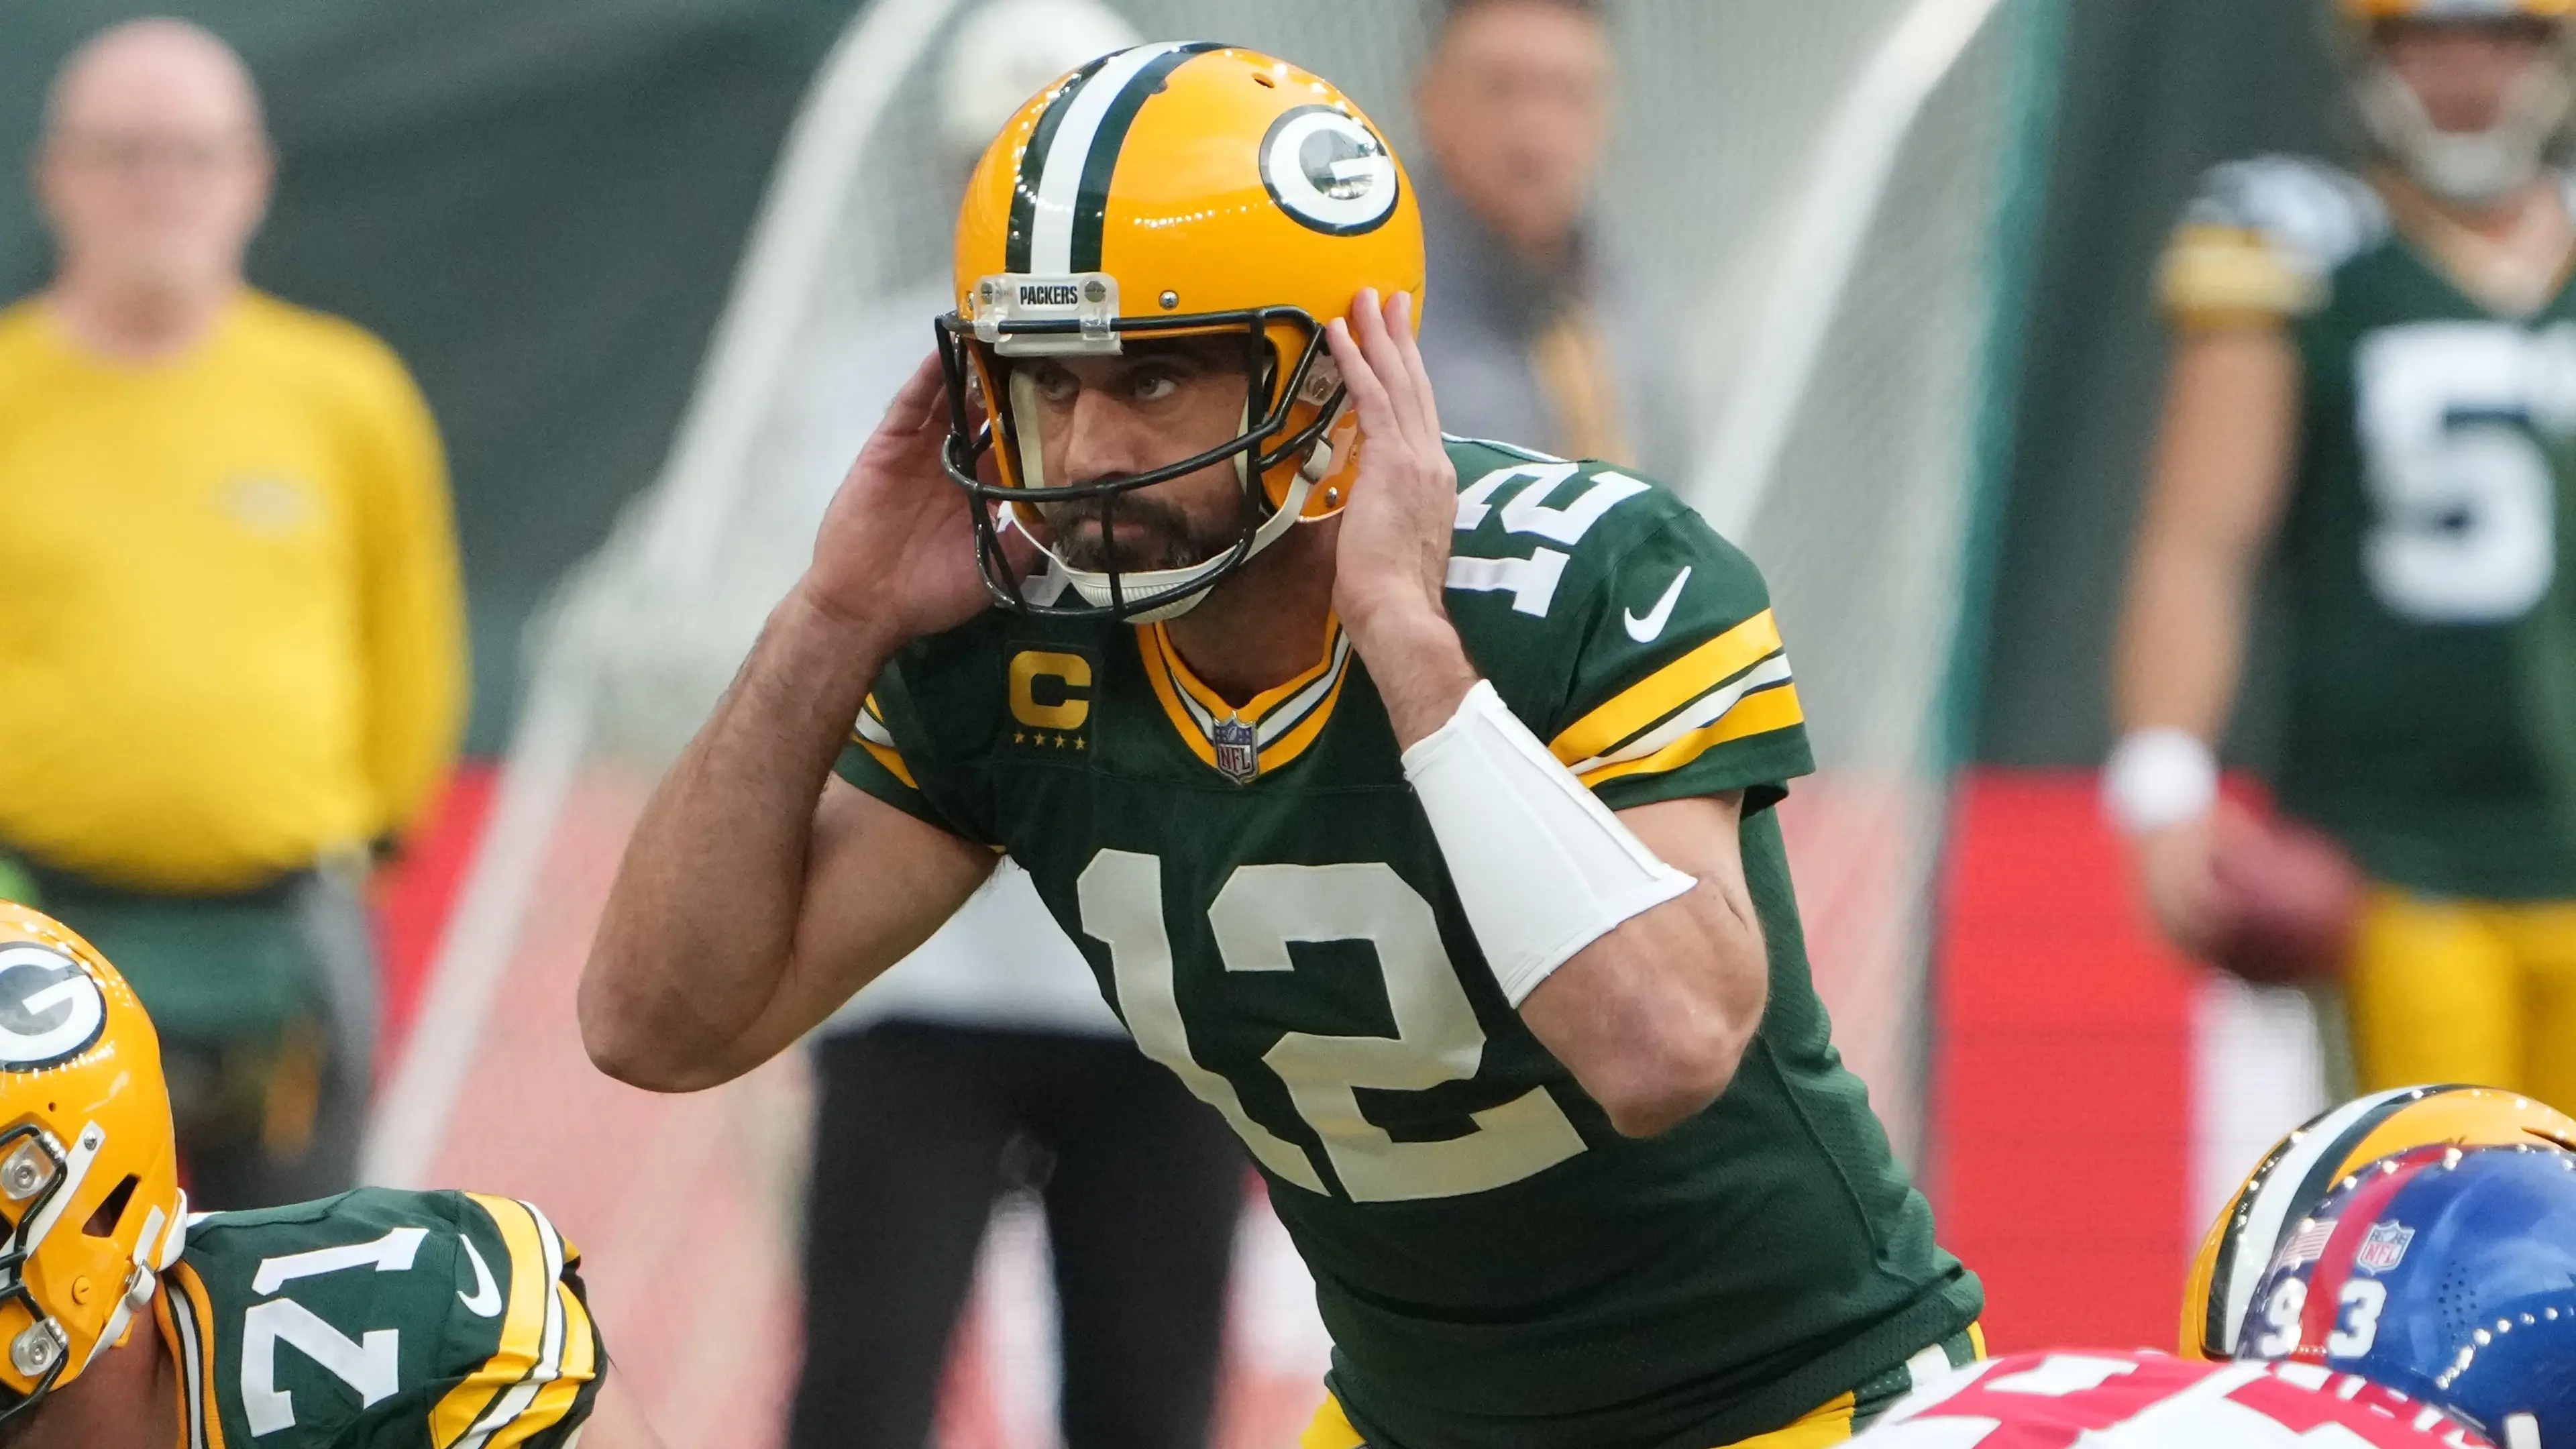 Aaron Rodgers (12) prepares to take the snap in the third quarter against the New York Giants / Kirby Lee - USA TODAY Sports